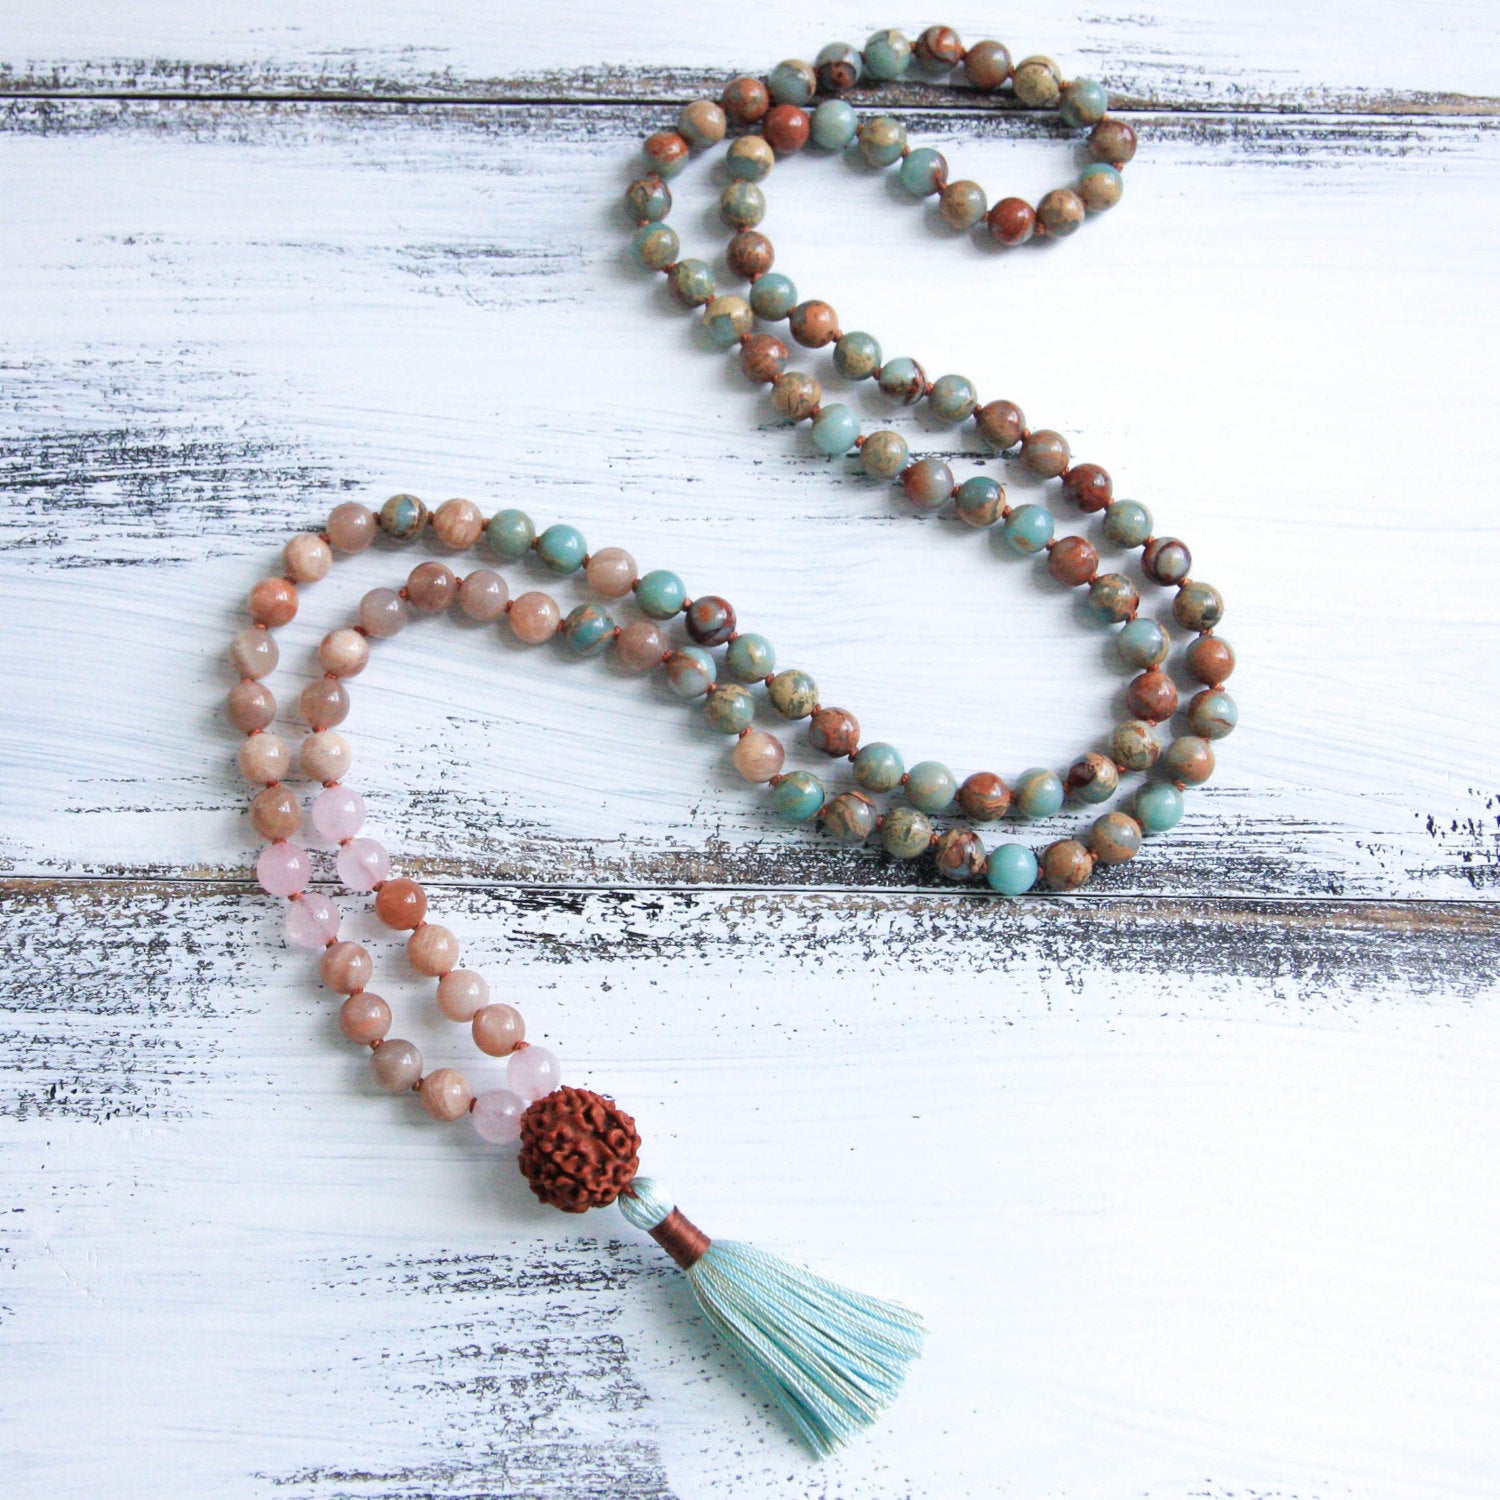 knotted mala prayer beads with tassel